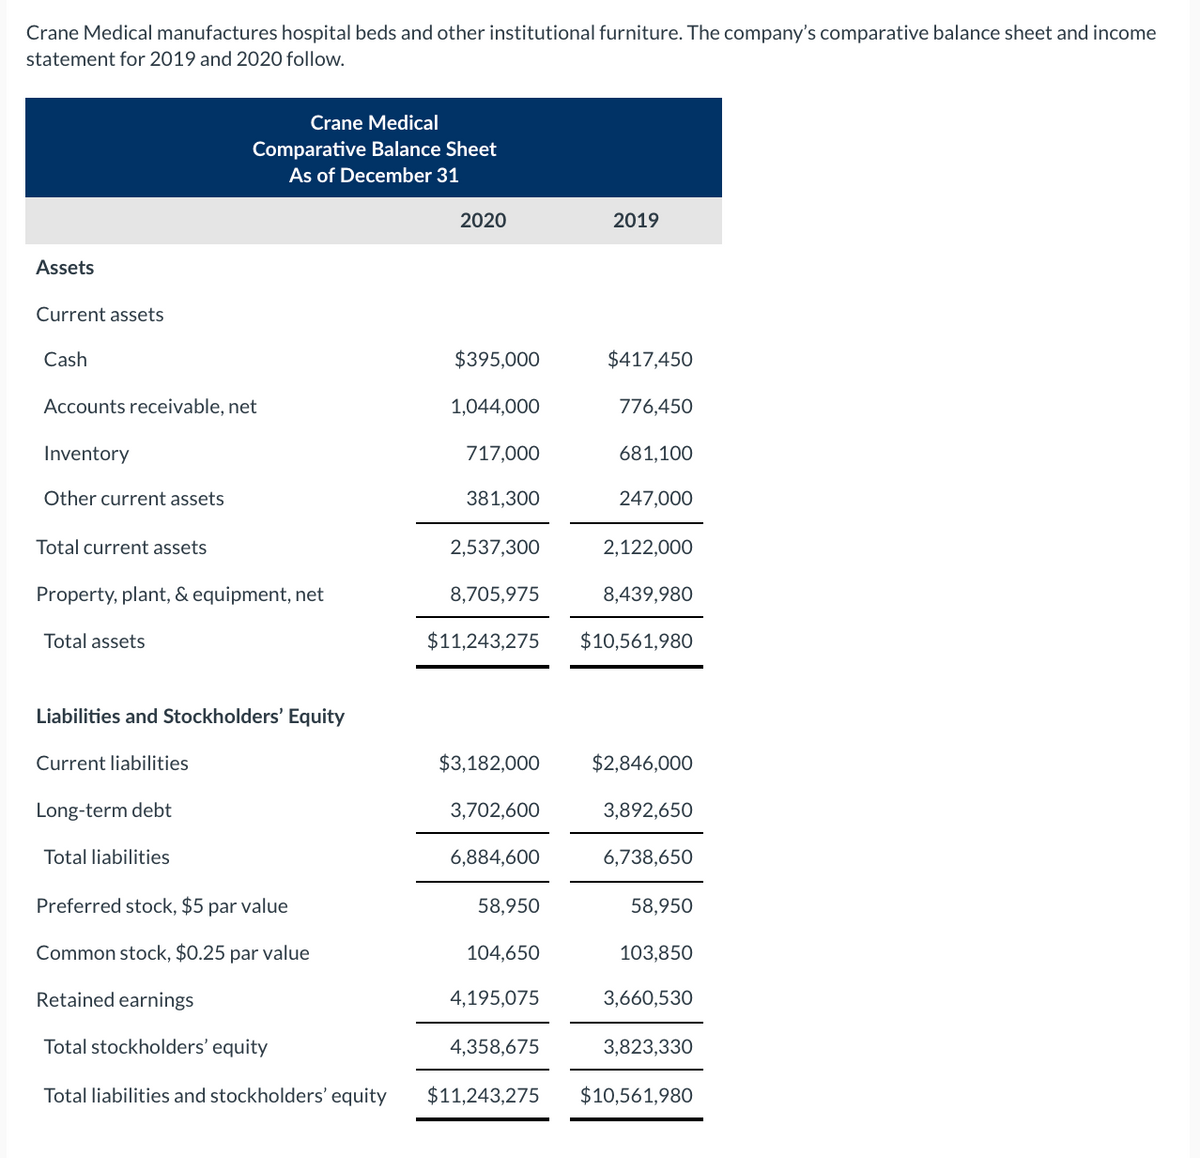 Crane Medical manufactures hospital beds and other institutional furniture. The company's comparative balance sheet and income
statement for 2019 and 2020 follow.
Crane Medical
Comparative Balance Sheet
As of December 31
2020
2019
Assets
Current assets
Cash
$395,000
$417,450
Accounts receivable, net
1,044,000
776,450
Inventory
717,000
681,100
Other current assets
381,300
247,000
Total current assets
2,537,300
2,122,000
Property, plant, & equipment, net
8,705,975
8,439,980
Total assets
$11,243,275
$10,561,980
Liabilities and Stockholders' Equity
Current liabilities
$3,182,000
$2,846,000
Long-term debt
3,702,600
3,892,650
Total liabilities
6,884,600
6,738,650
Preferred stock, $5 par value
58,950
58,950
Common stock, $0.25 par value
104,650
103,850
Retained earnings
4,195,075
3,660,530
Total stockholders' equity
4,358,675
3,823,330
Total liabilities and stockholders' equity
$11,243,275
$10,561,980
